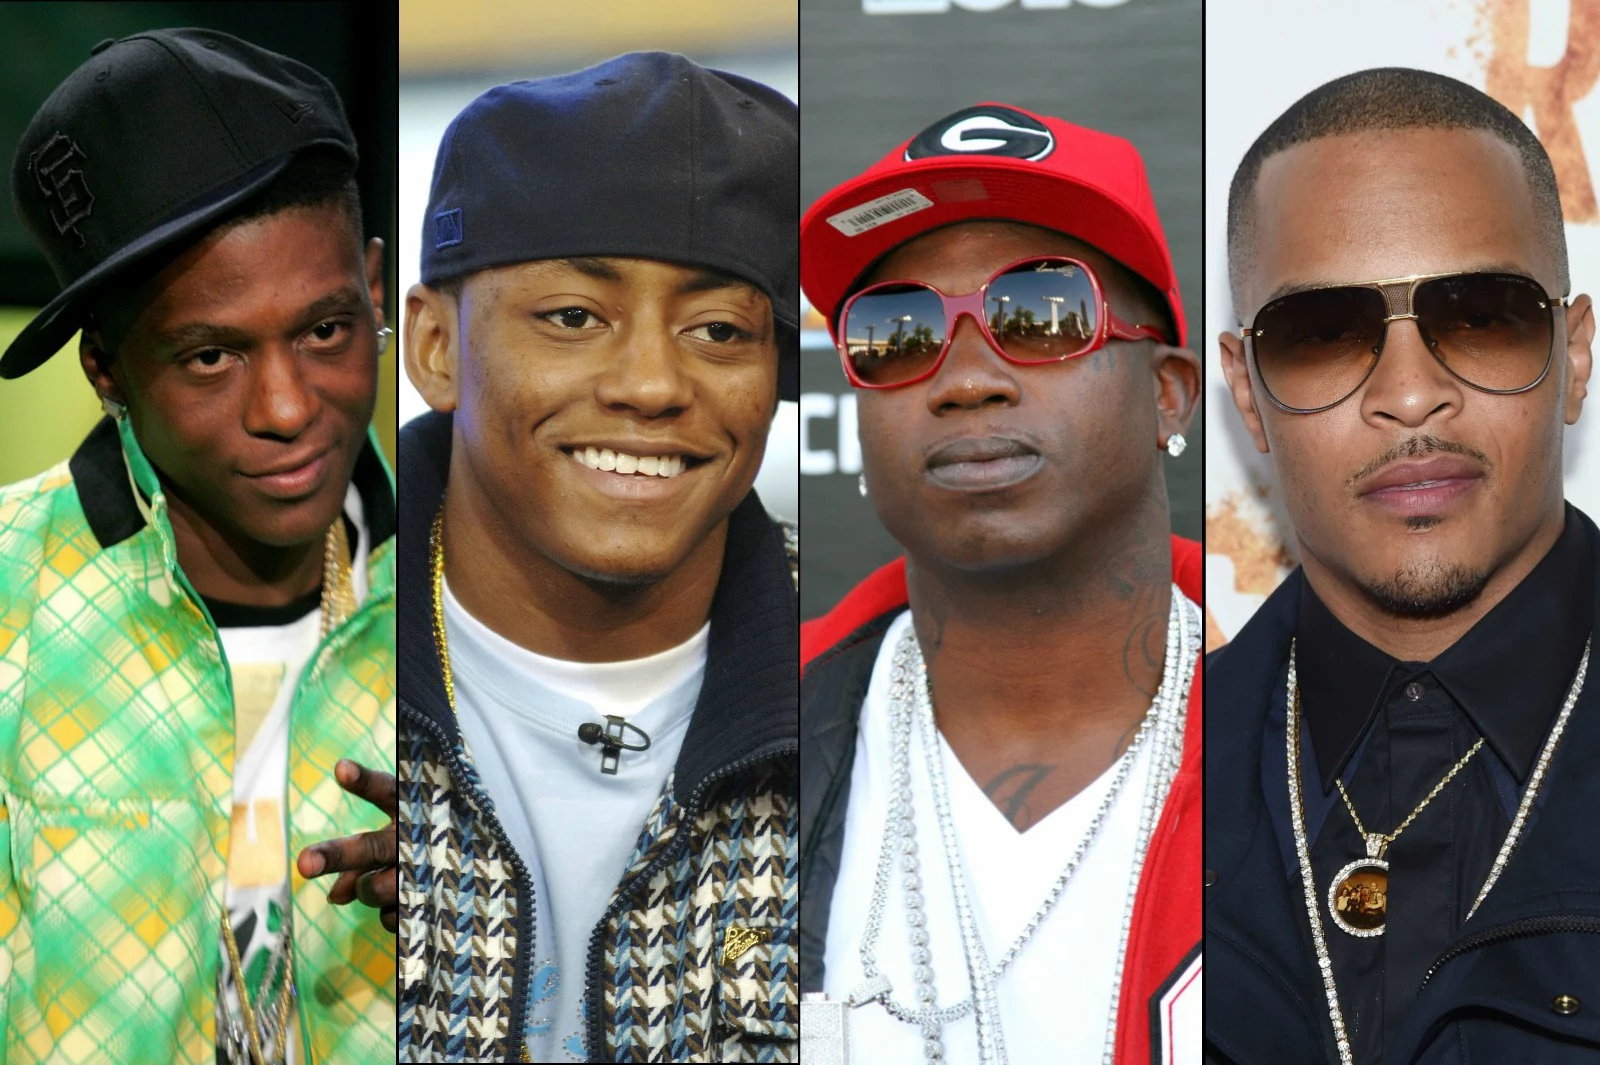 https://townsquare.media/site/812/files/2016/06/Boosie-Cassidy-Gucci-TIP.jpg